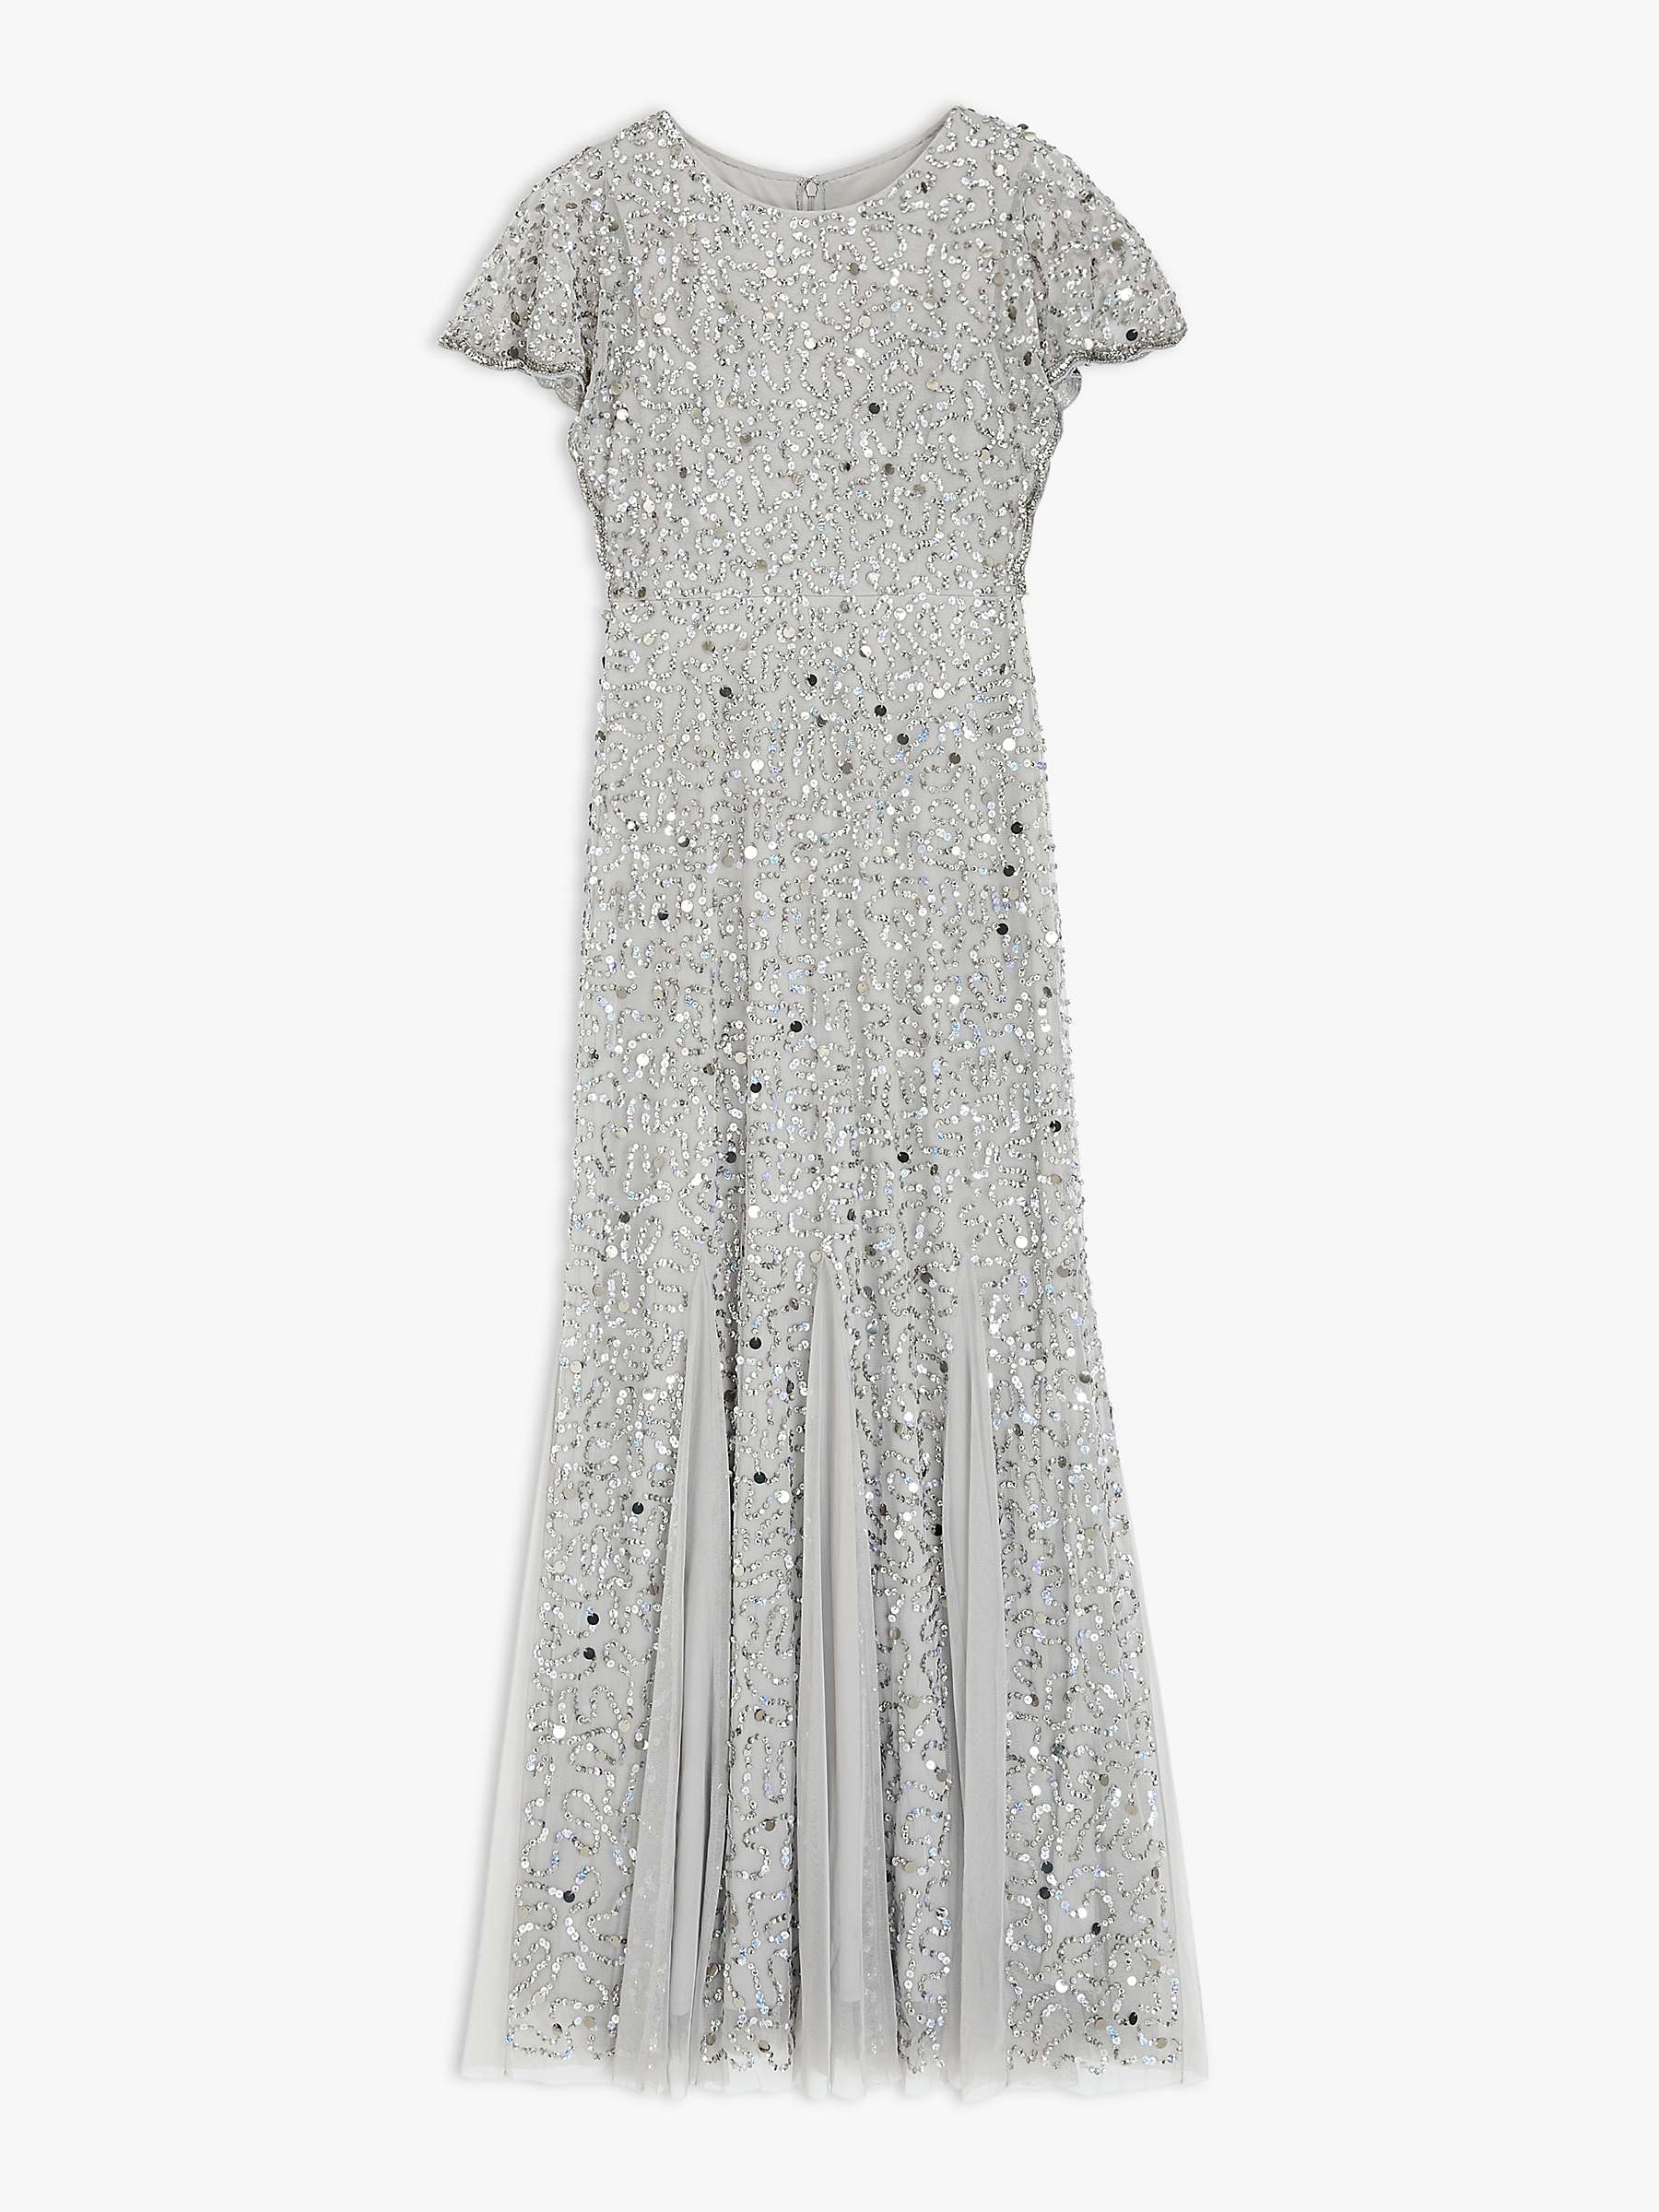 Buy Lace & Beads Sally Embellished Maxi Dress, Grey Online at johnlewis.com